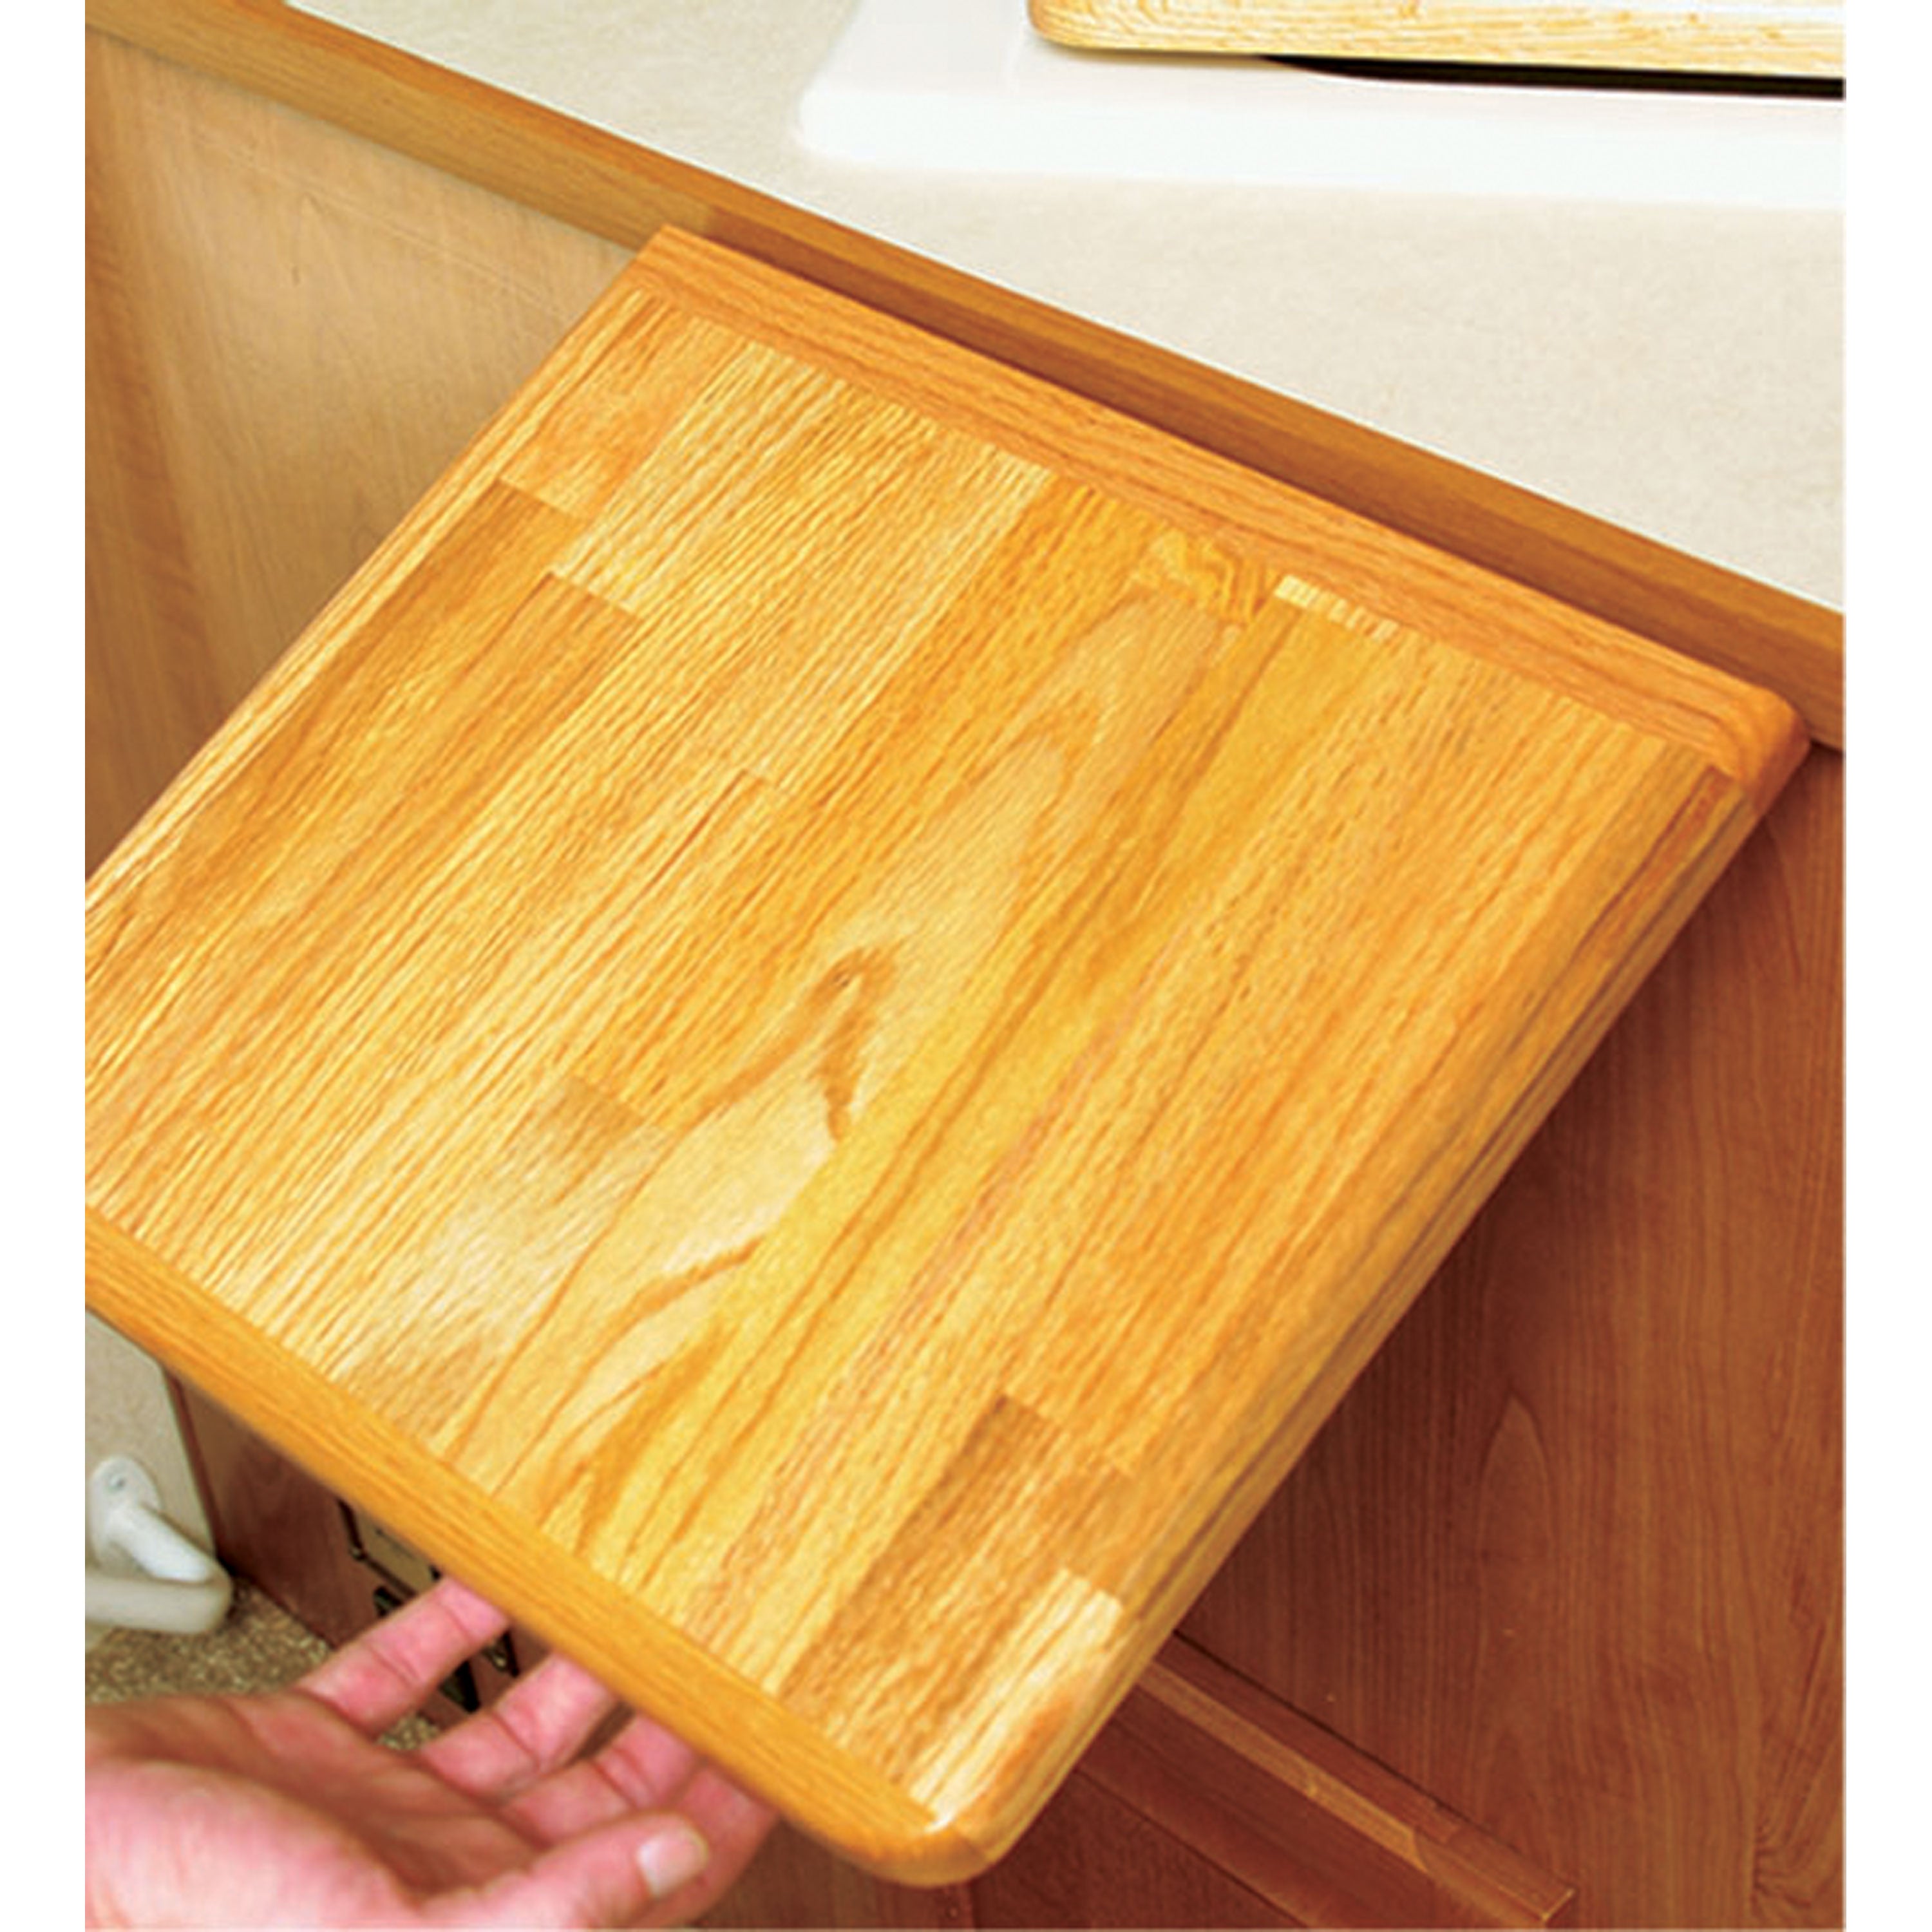 Camco 43421 Oak Accents Counter Top Extension - 12" x 13.5" x 0.75"